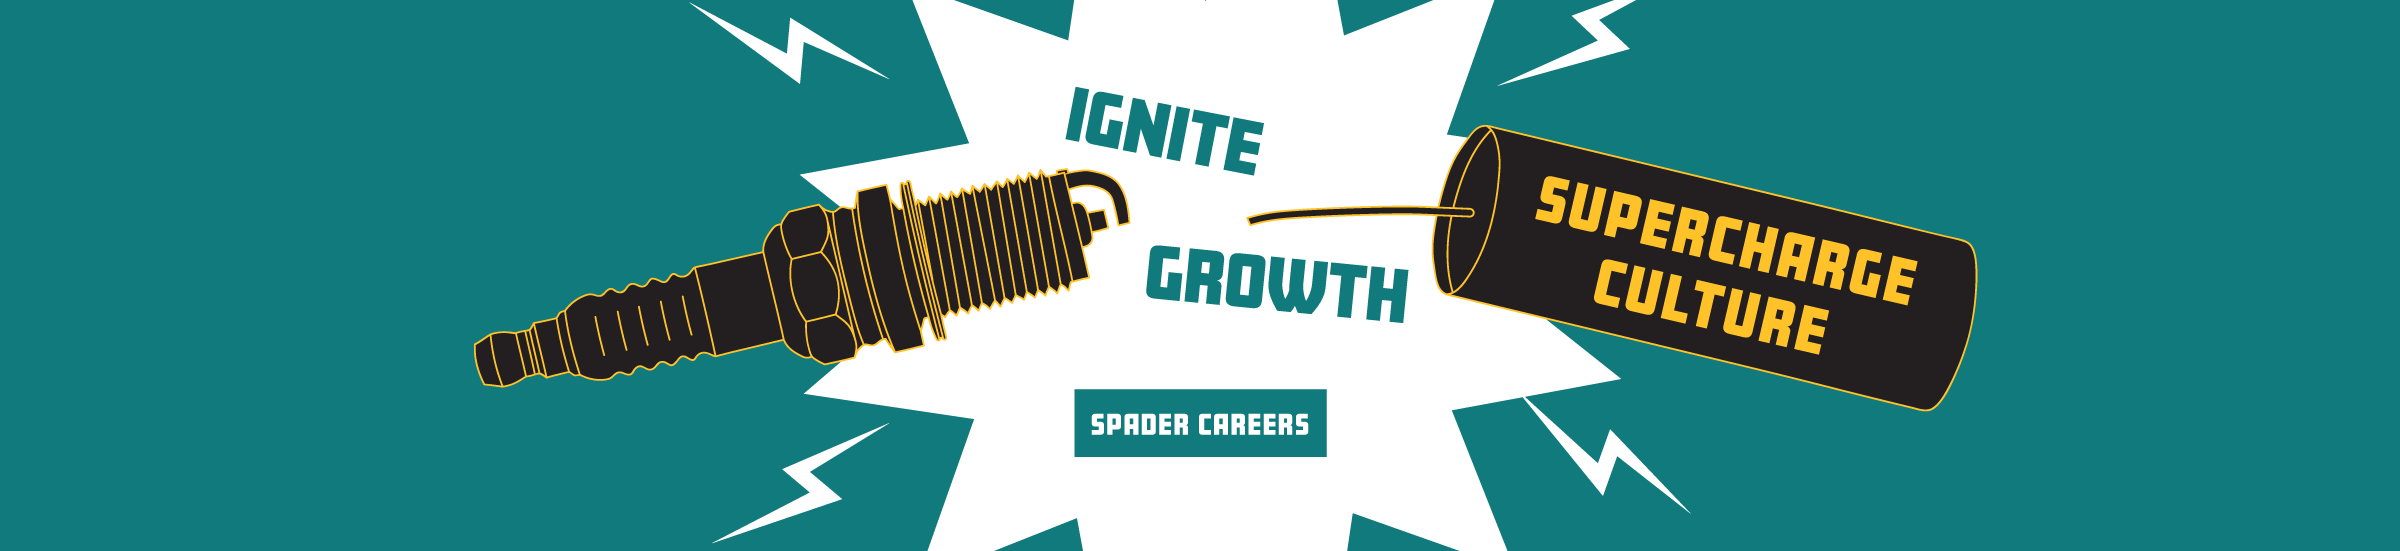 Ignite Growth, Supercharge Culture. Spader Careers.